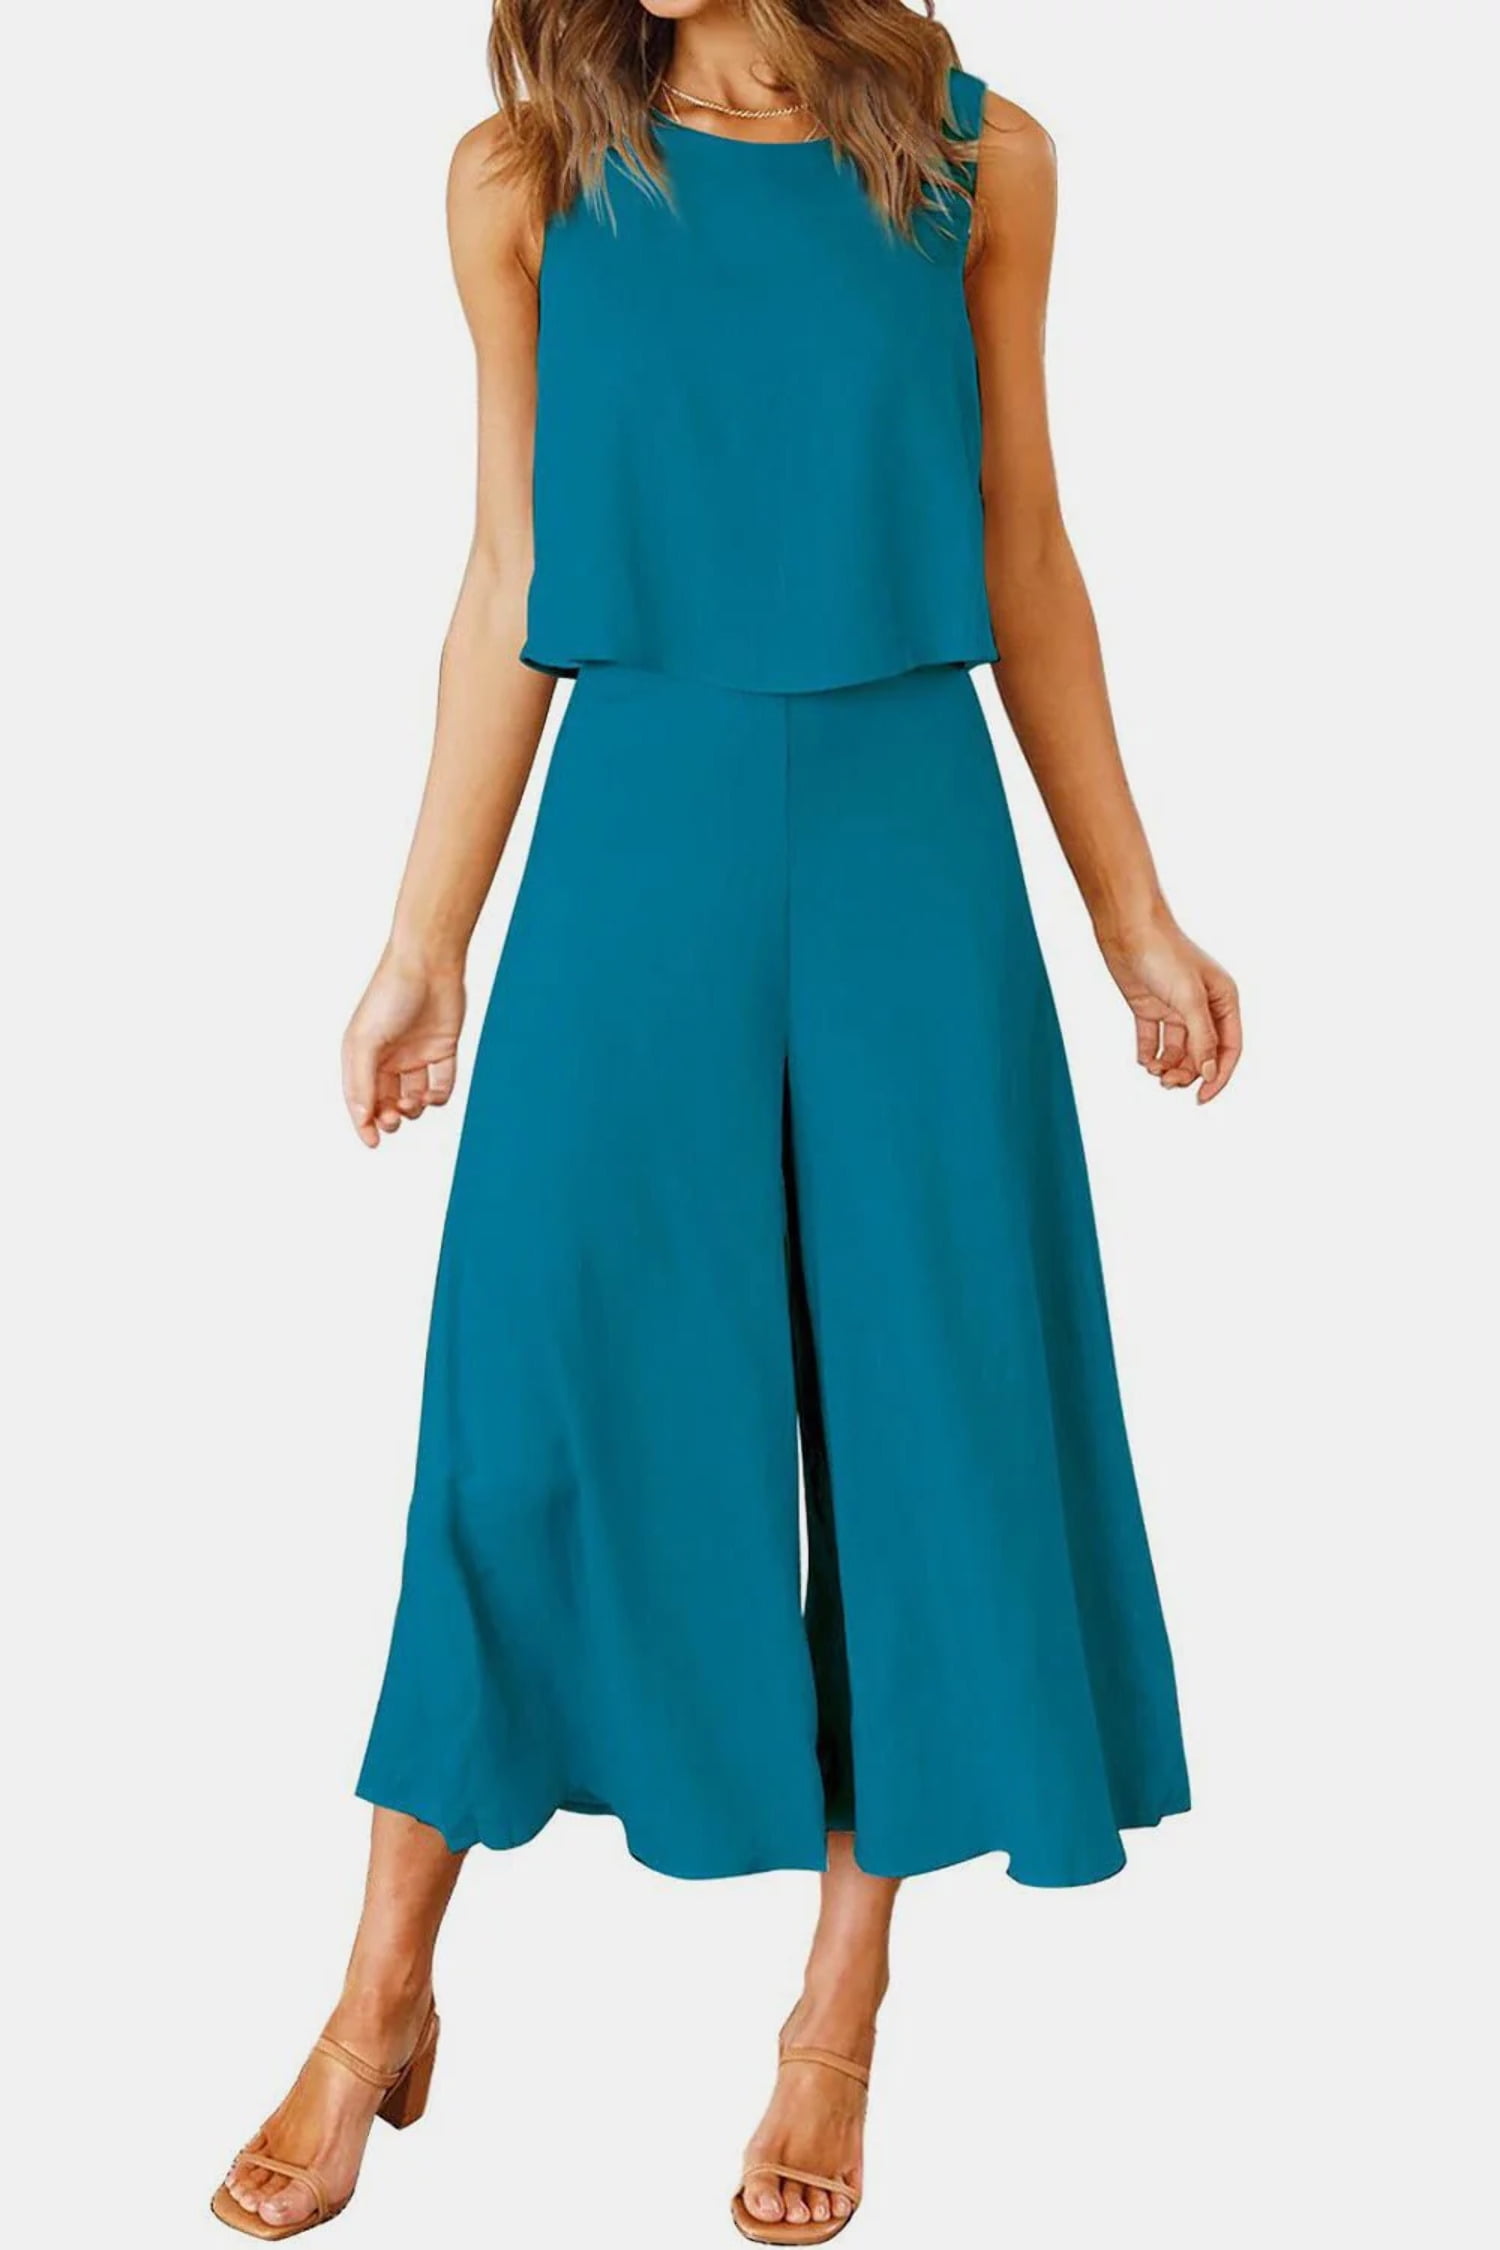 Casual Chic Two-Piece Set with Round Neck Top and Wide Leg Pants ...